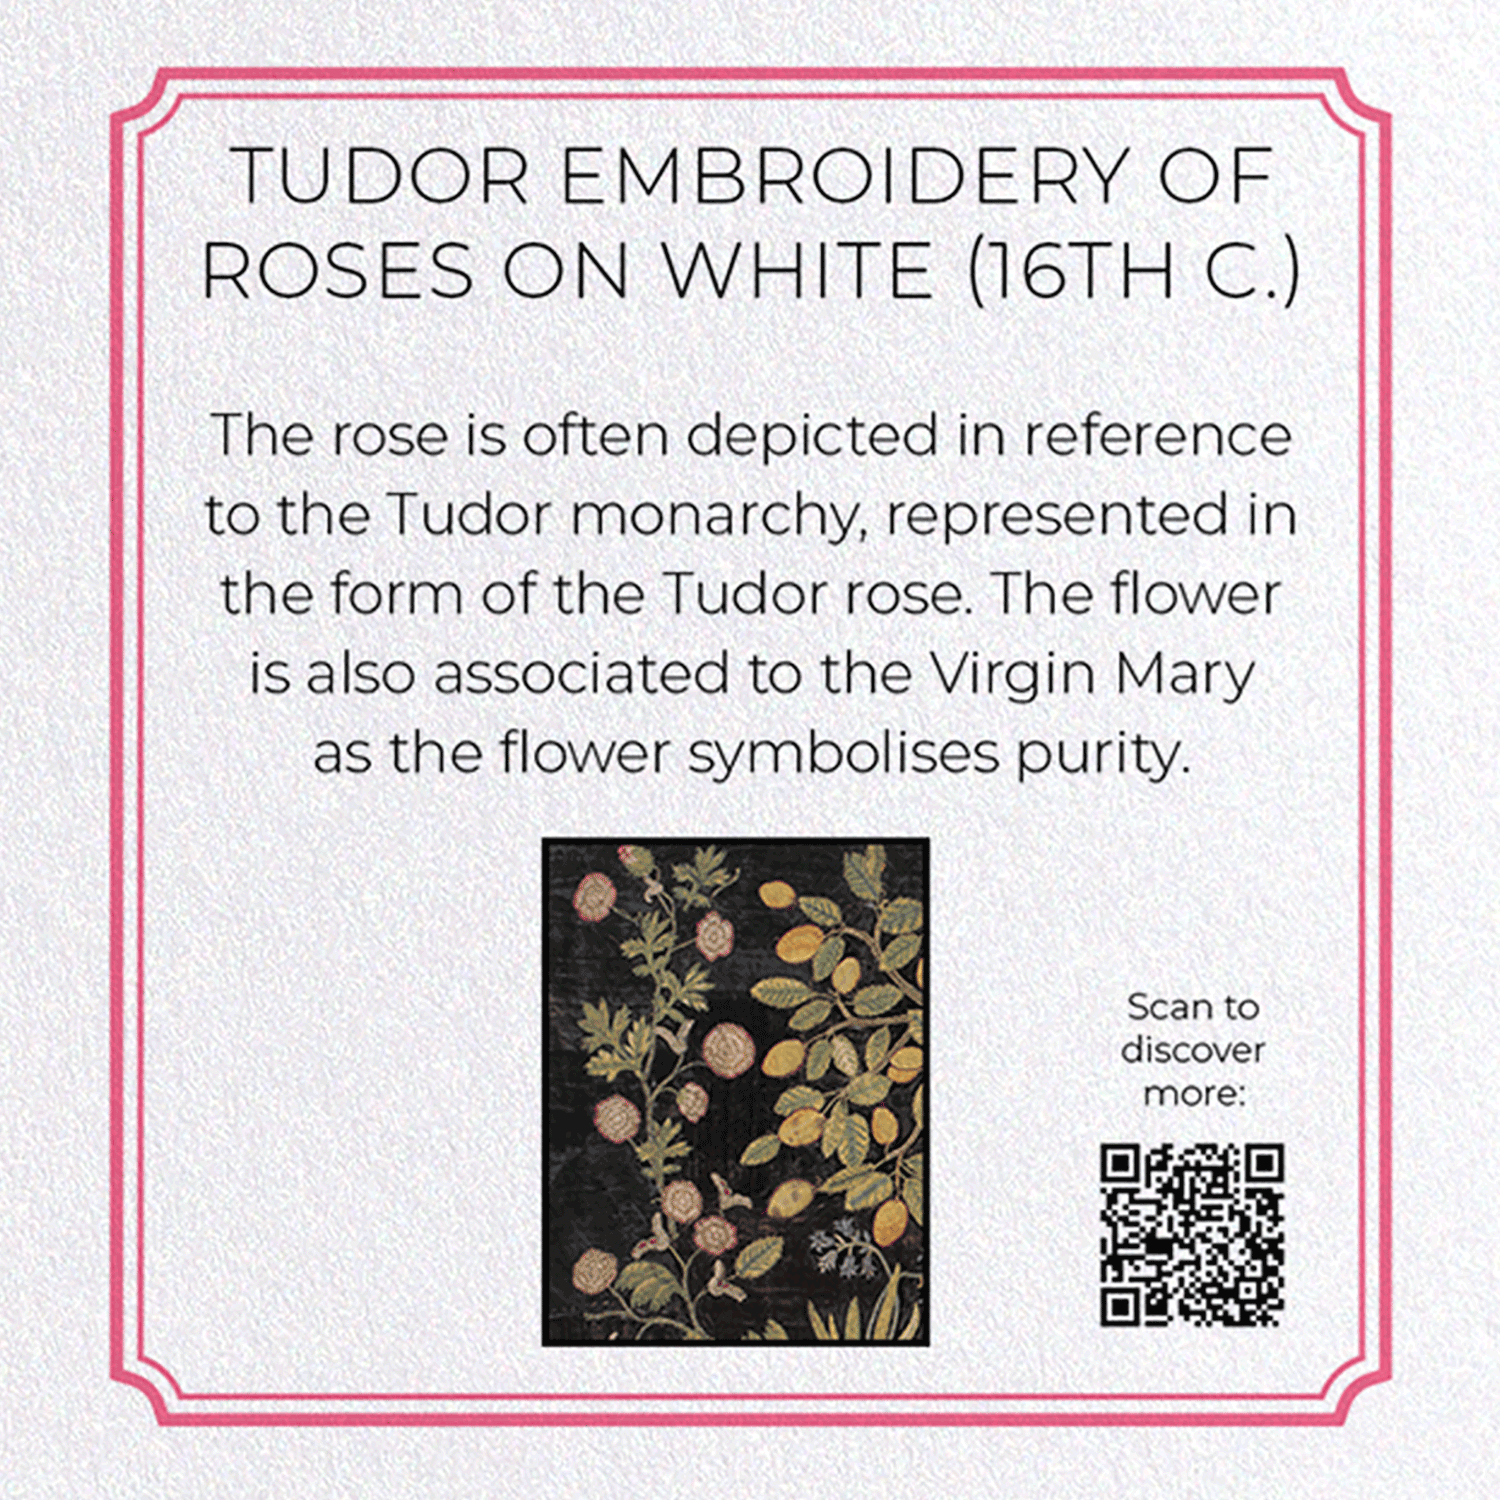 TUDOR EMBROIDERY OF ROSES ON WHITE (16TH C.): Pattern Greeting Card